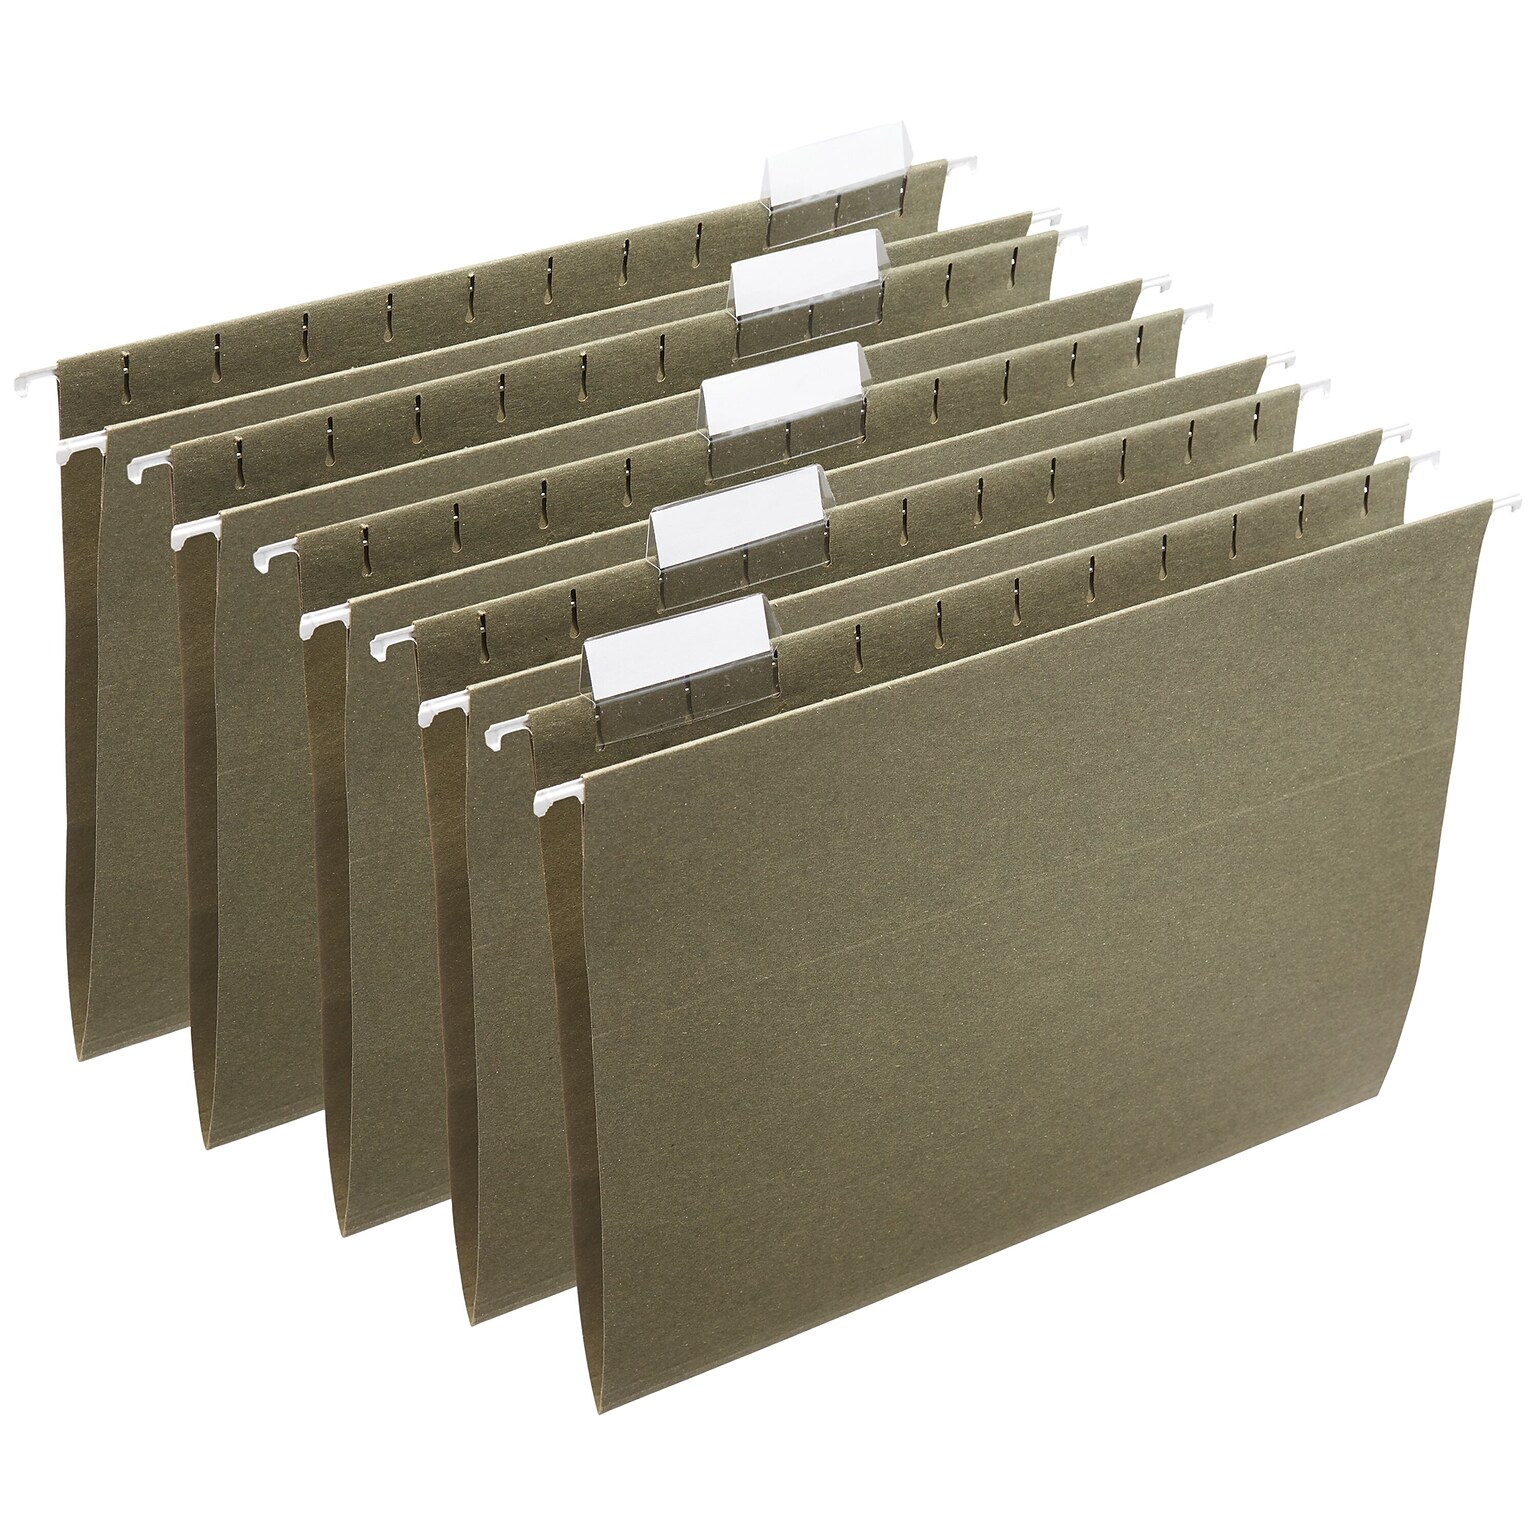 Staples® 100% Recycled Hanging File Folders, Letter, 1/5-Cut Tab, Letter Size, Standard Green, 25/Box (ST116764)